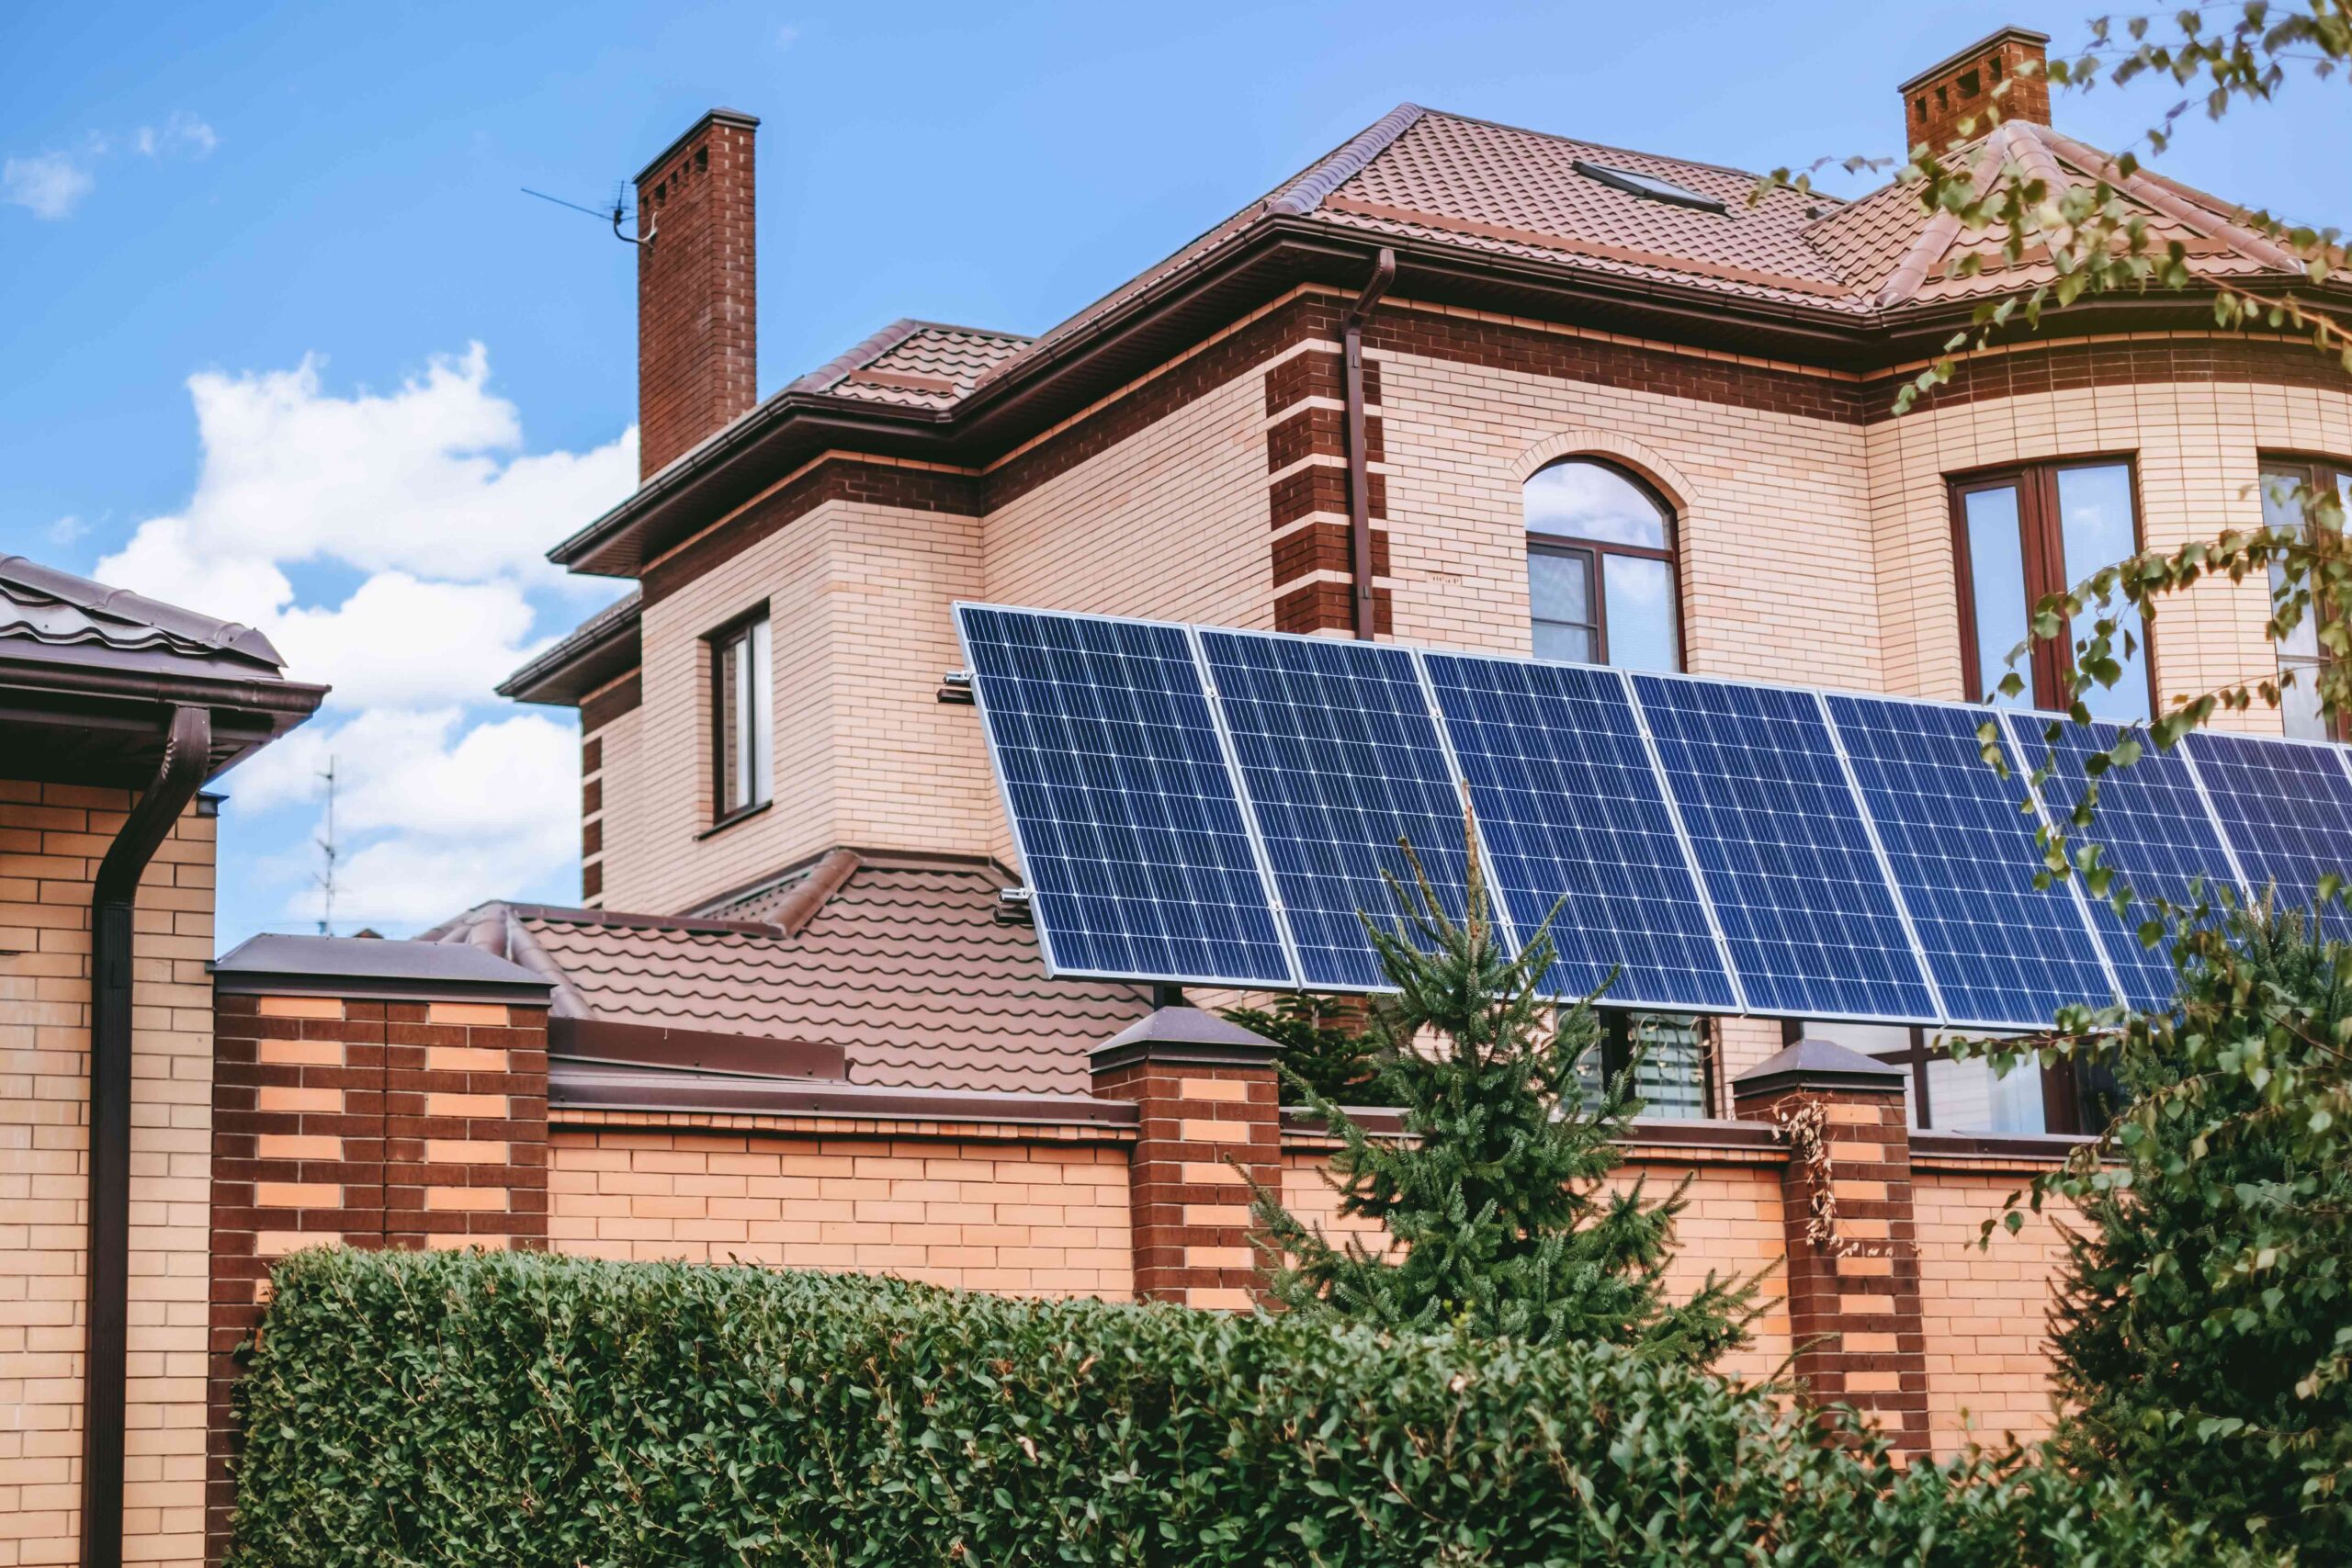 Going Solar: The Cost of Installing Solar Panels on Your Rooftop